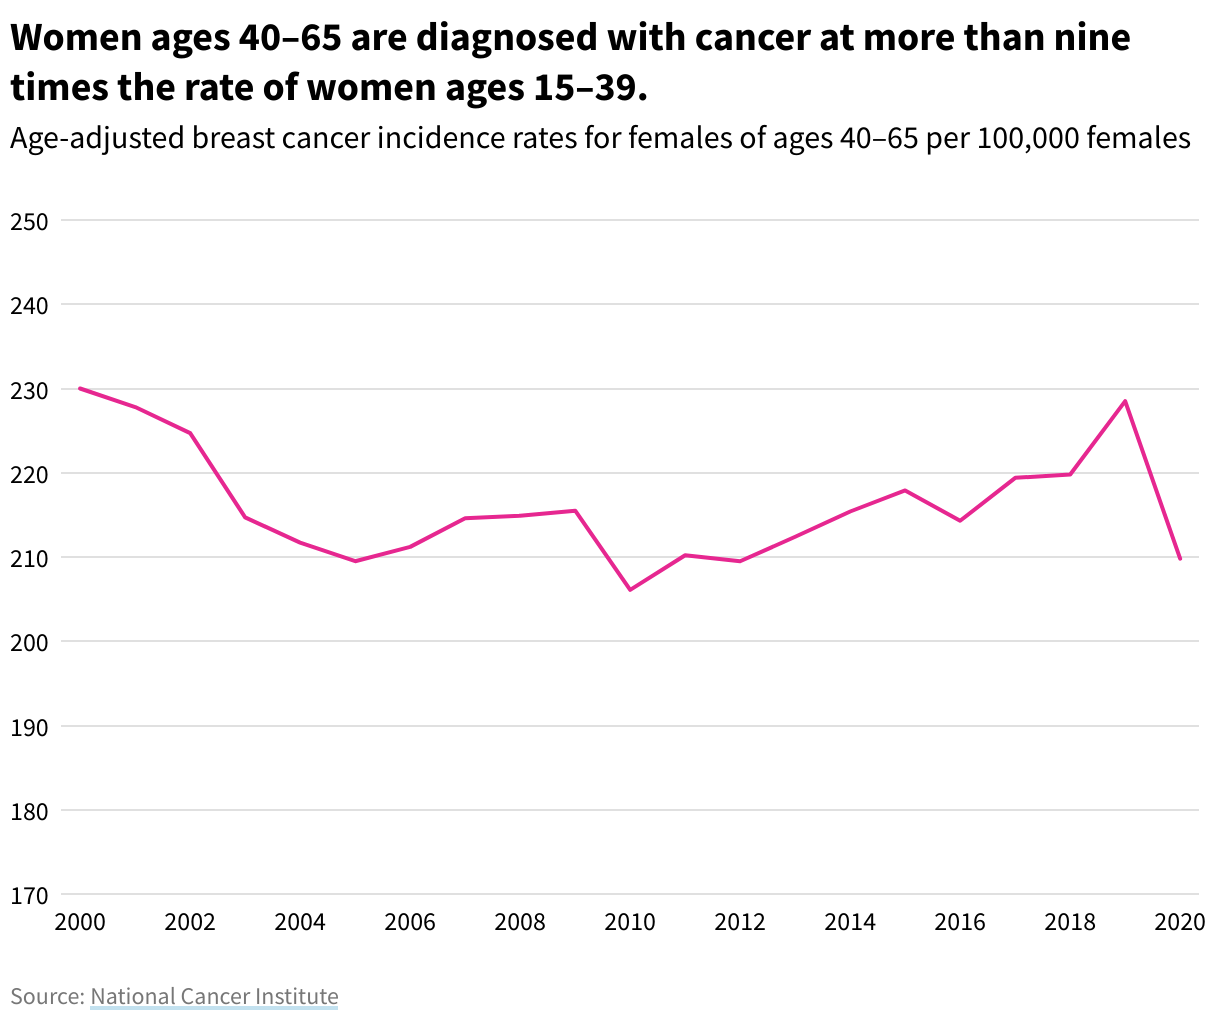 Line graph showing breast cancer SEER incidence rates for women aged 40-65. Women ages 40-65 are diagnosed with cancer more than 9 times the rate of women aged 15-39.